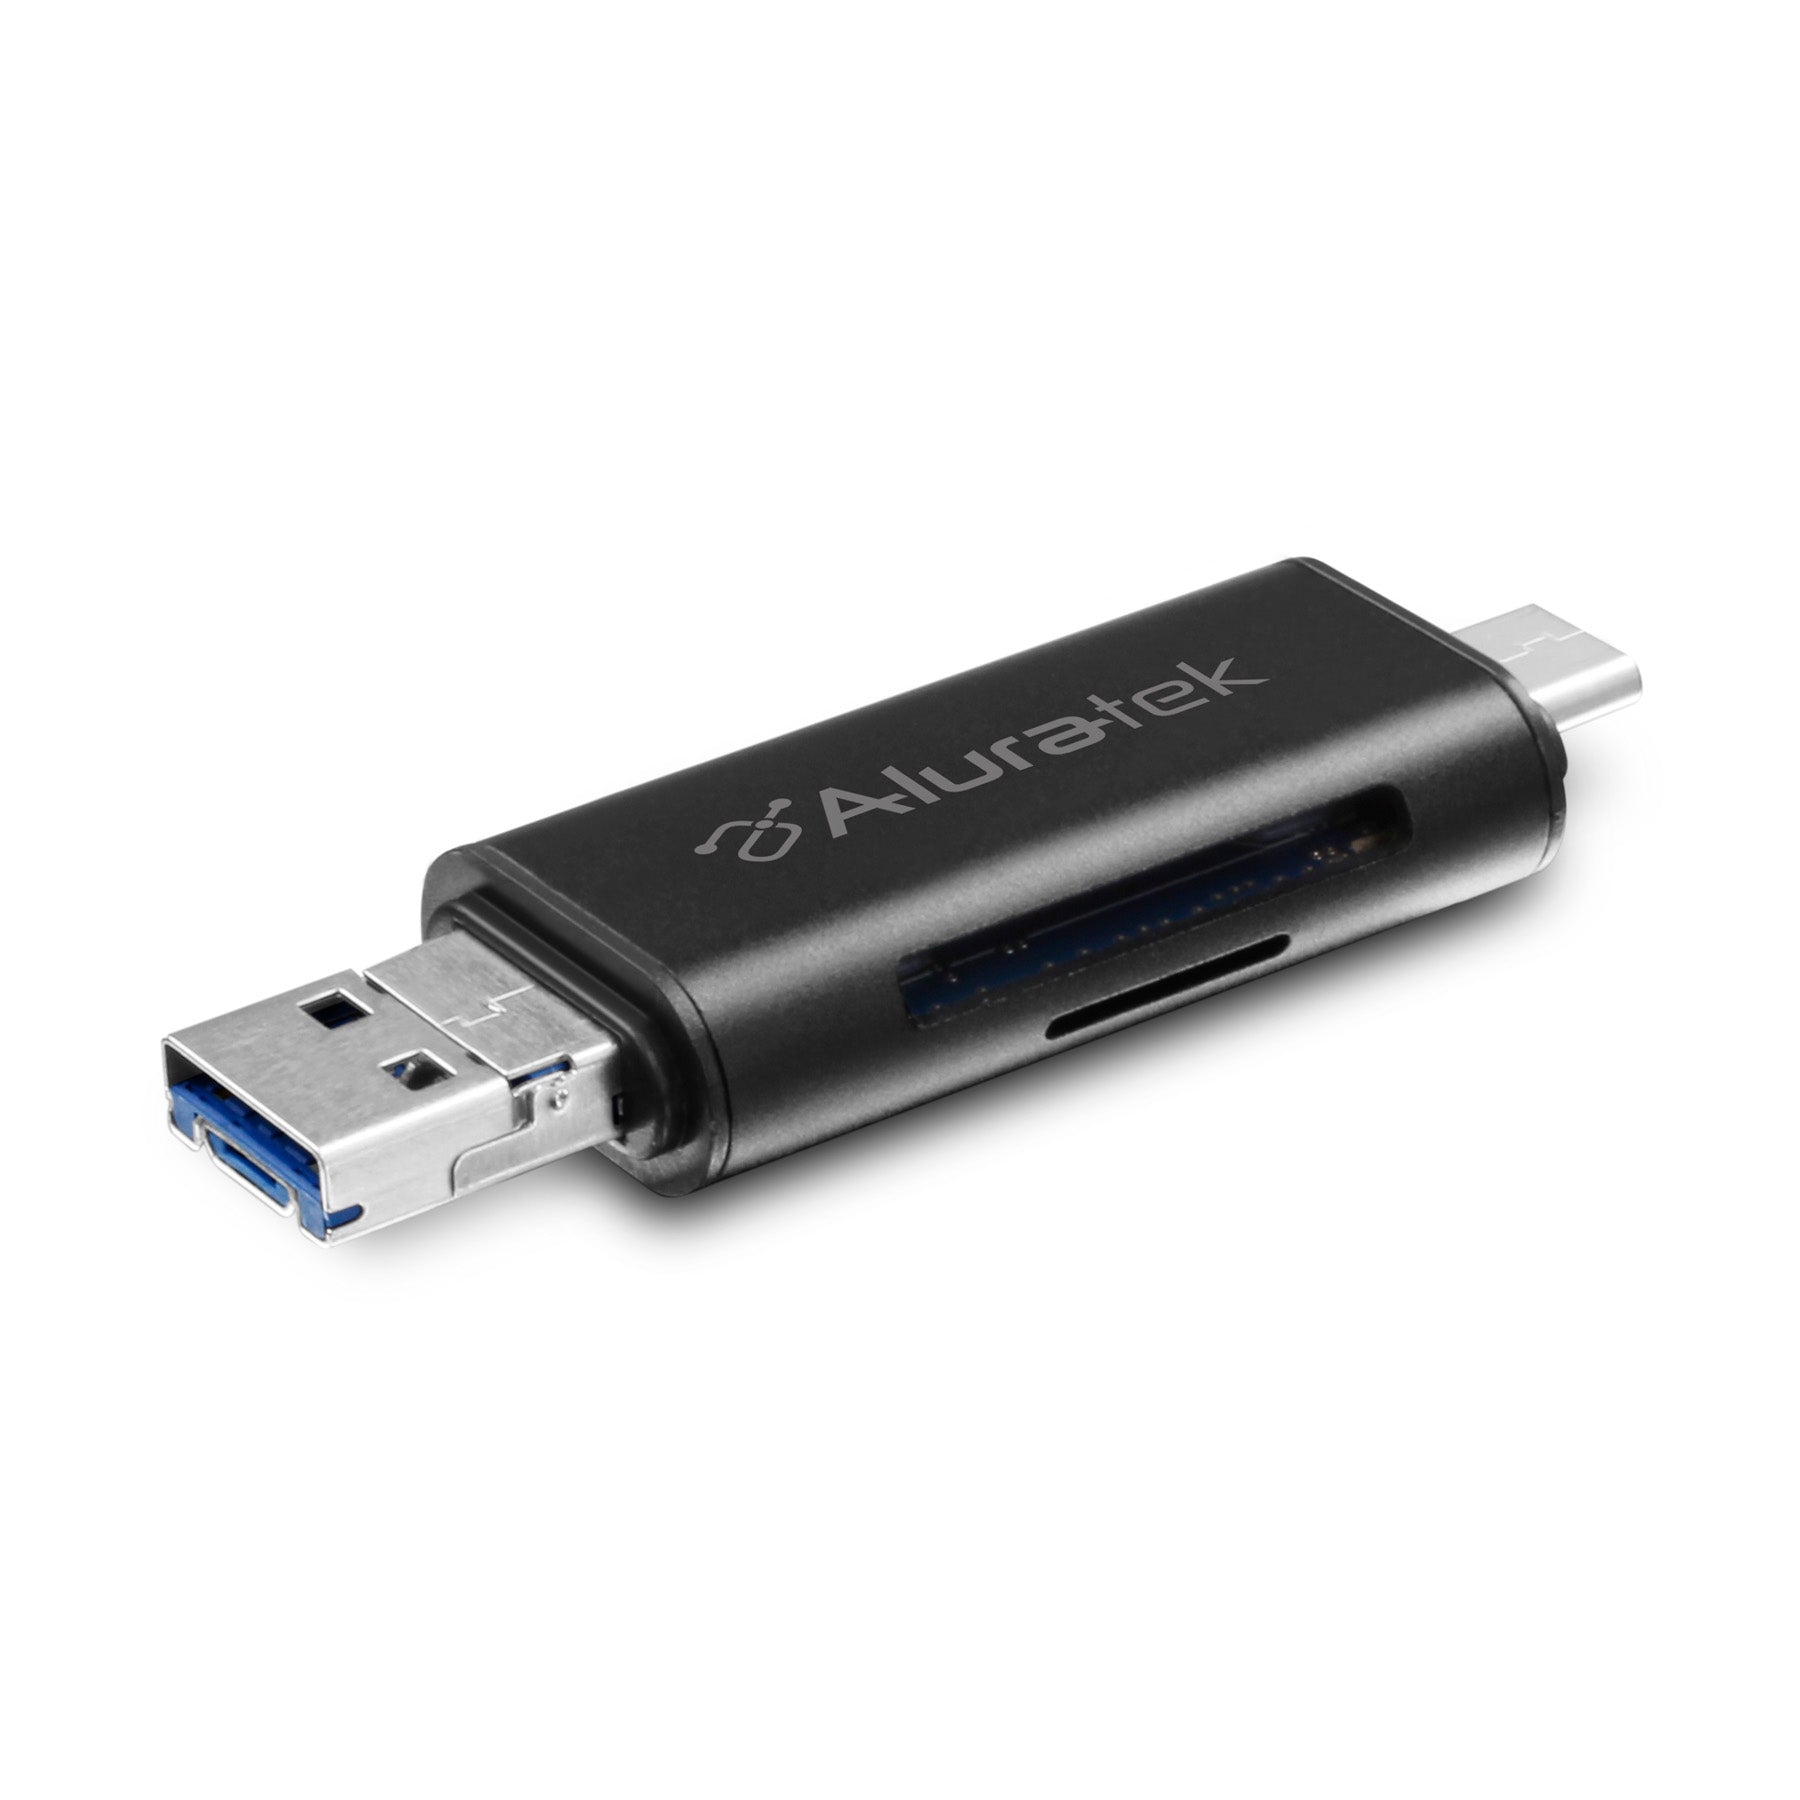 Aluratek USB 3.1 / Type-C / Micro USB OTG (On-The-Go) SD and Micro SD Card Reader